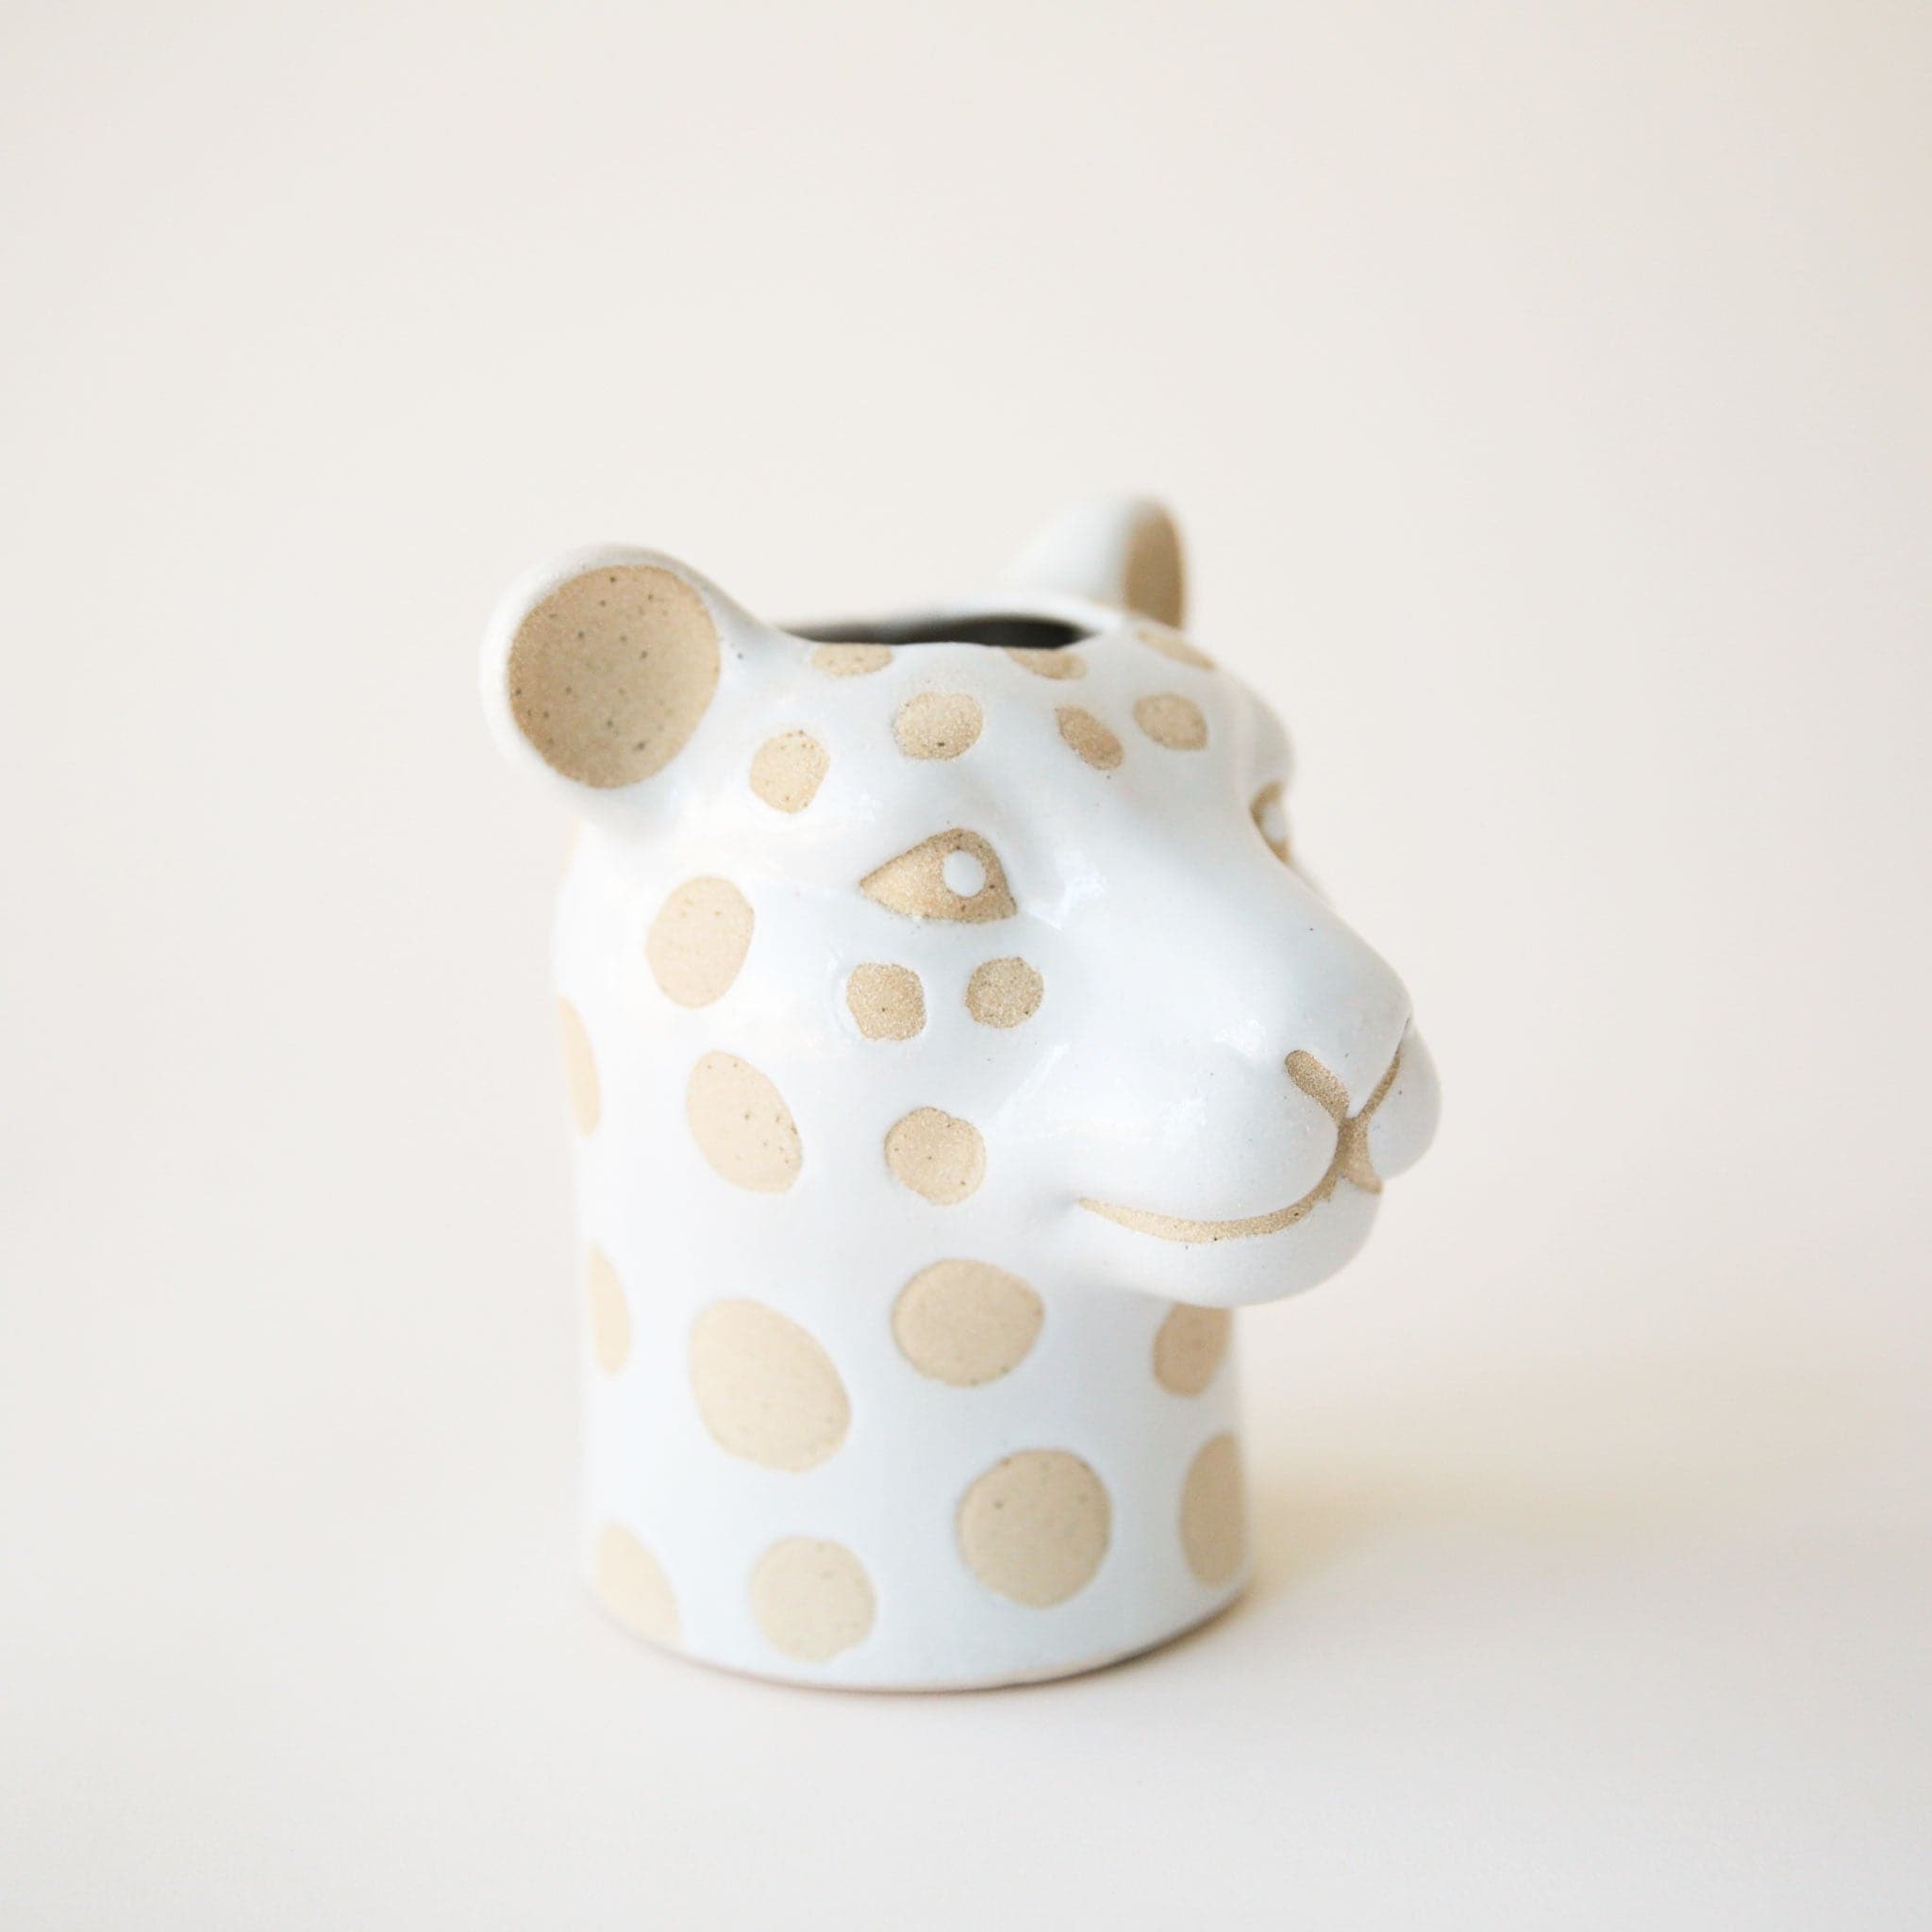 On a cream background is a leopard shaped ceramic planter with tan spots and an opening at the top. 